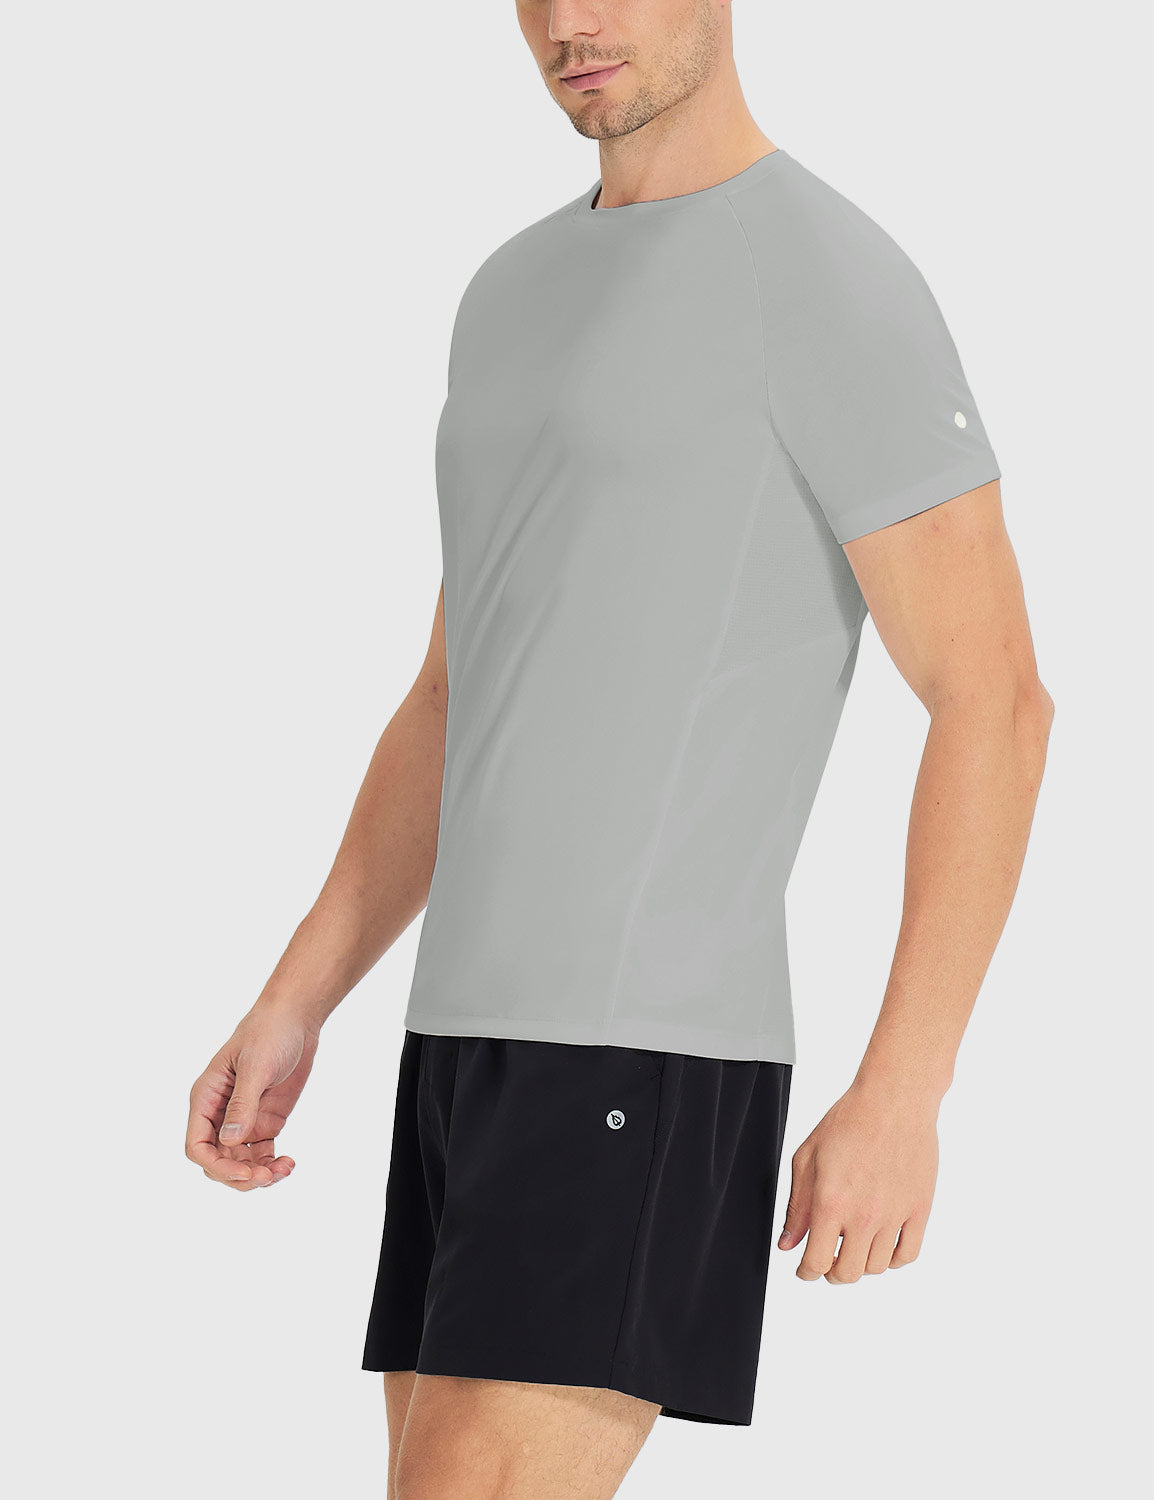 Baleaf Men's Quick Dry UPF 50+ Athletic T-shirts Silver Sconce Side